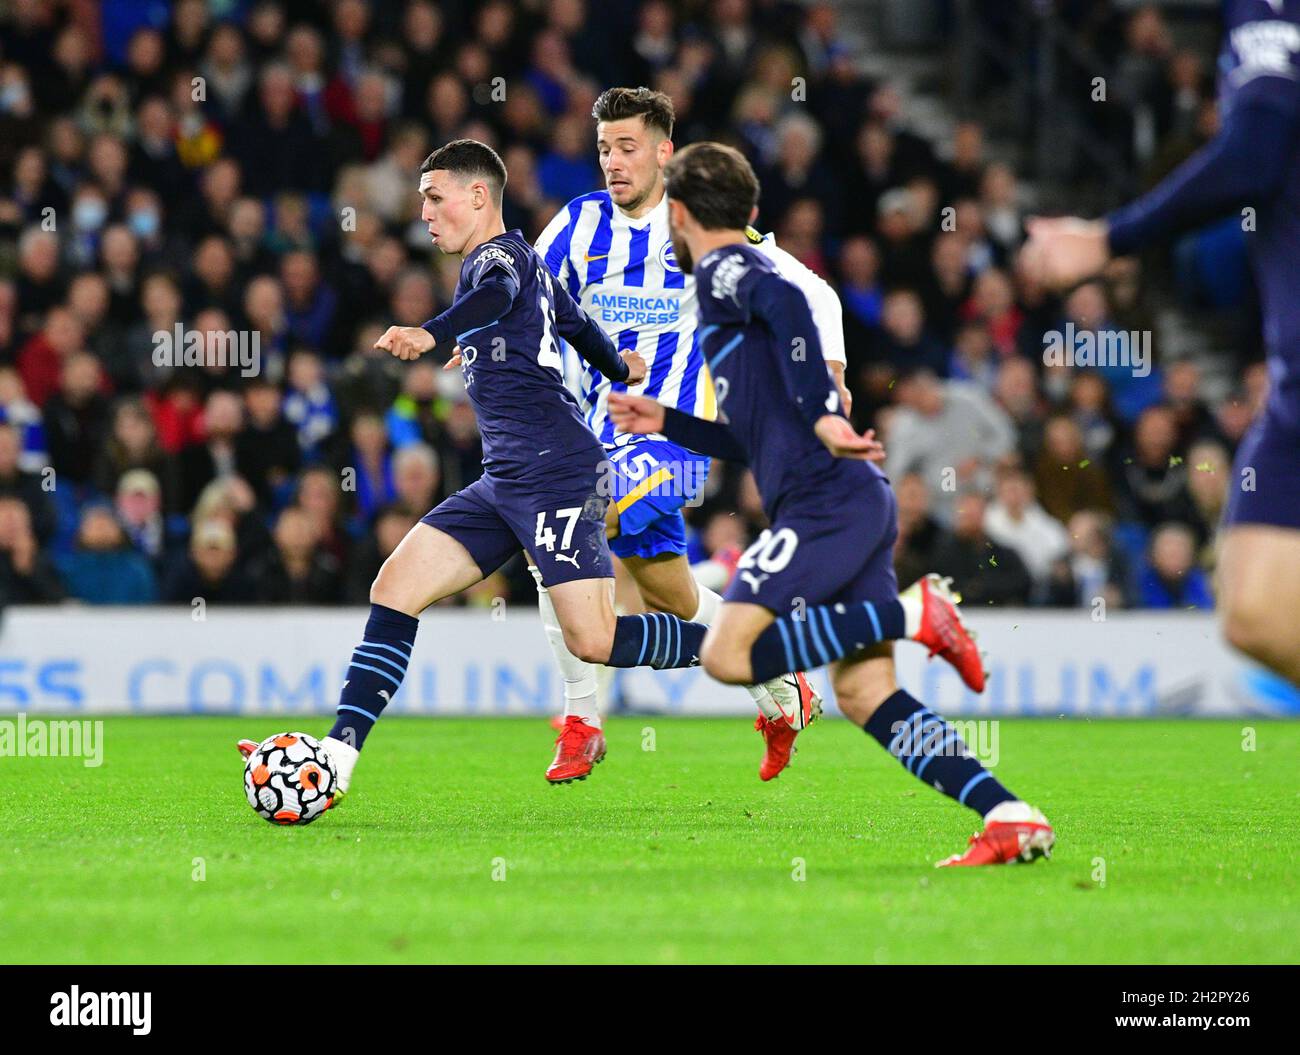 Brighton, UK. 23rd Oct, 2021. Phil Foden of Manchester City makes a run on goal during the Premier League match between Brighton & Hove Albion and Manchester City at The Amex on October 23rd 2021 in Brighton, England. (Photo by Jeff Mood/phcimages.com) Credit: PHC Images/Alamy Live News Stock Photo